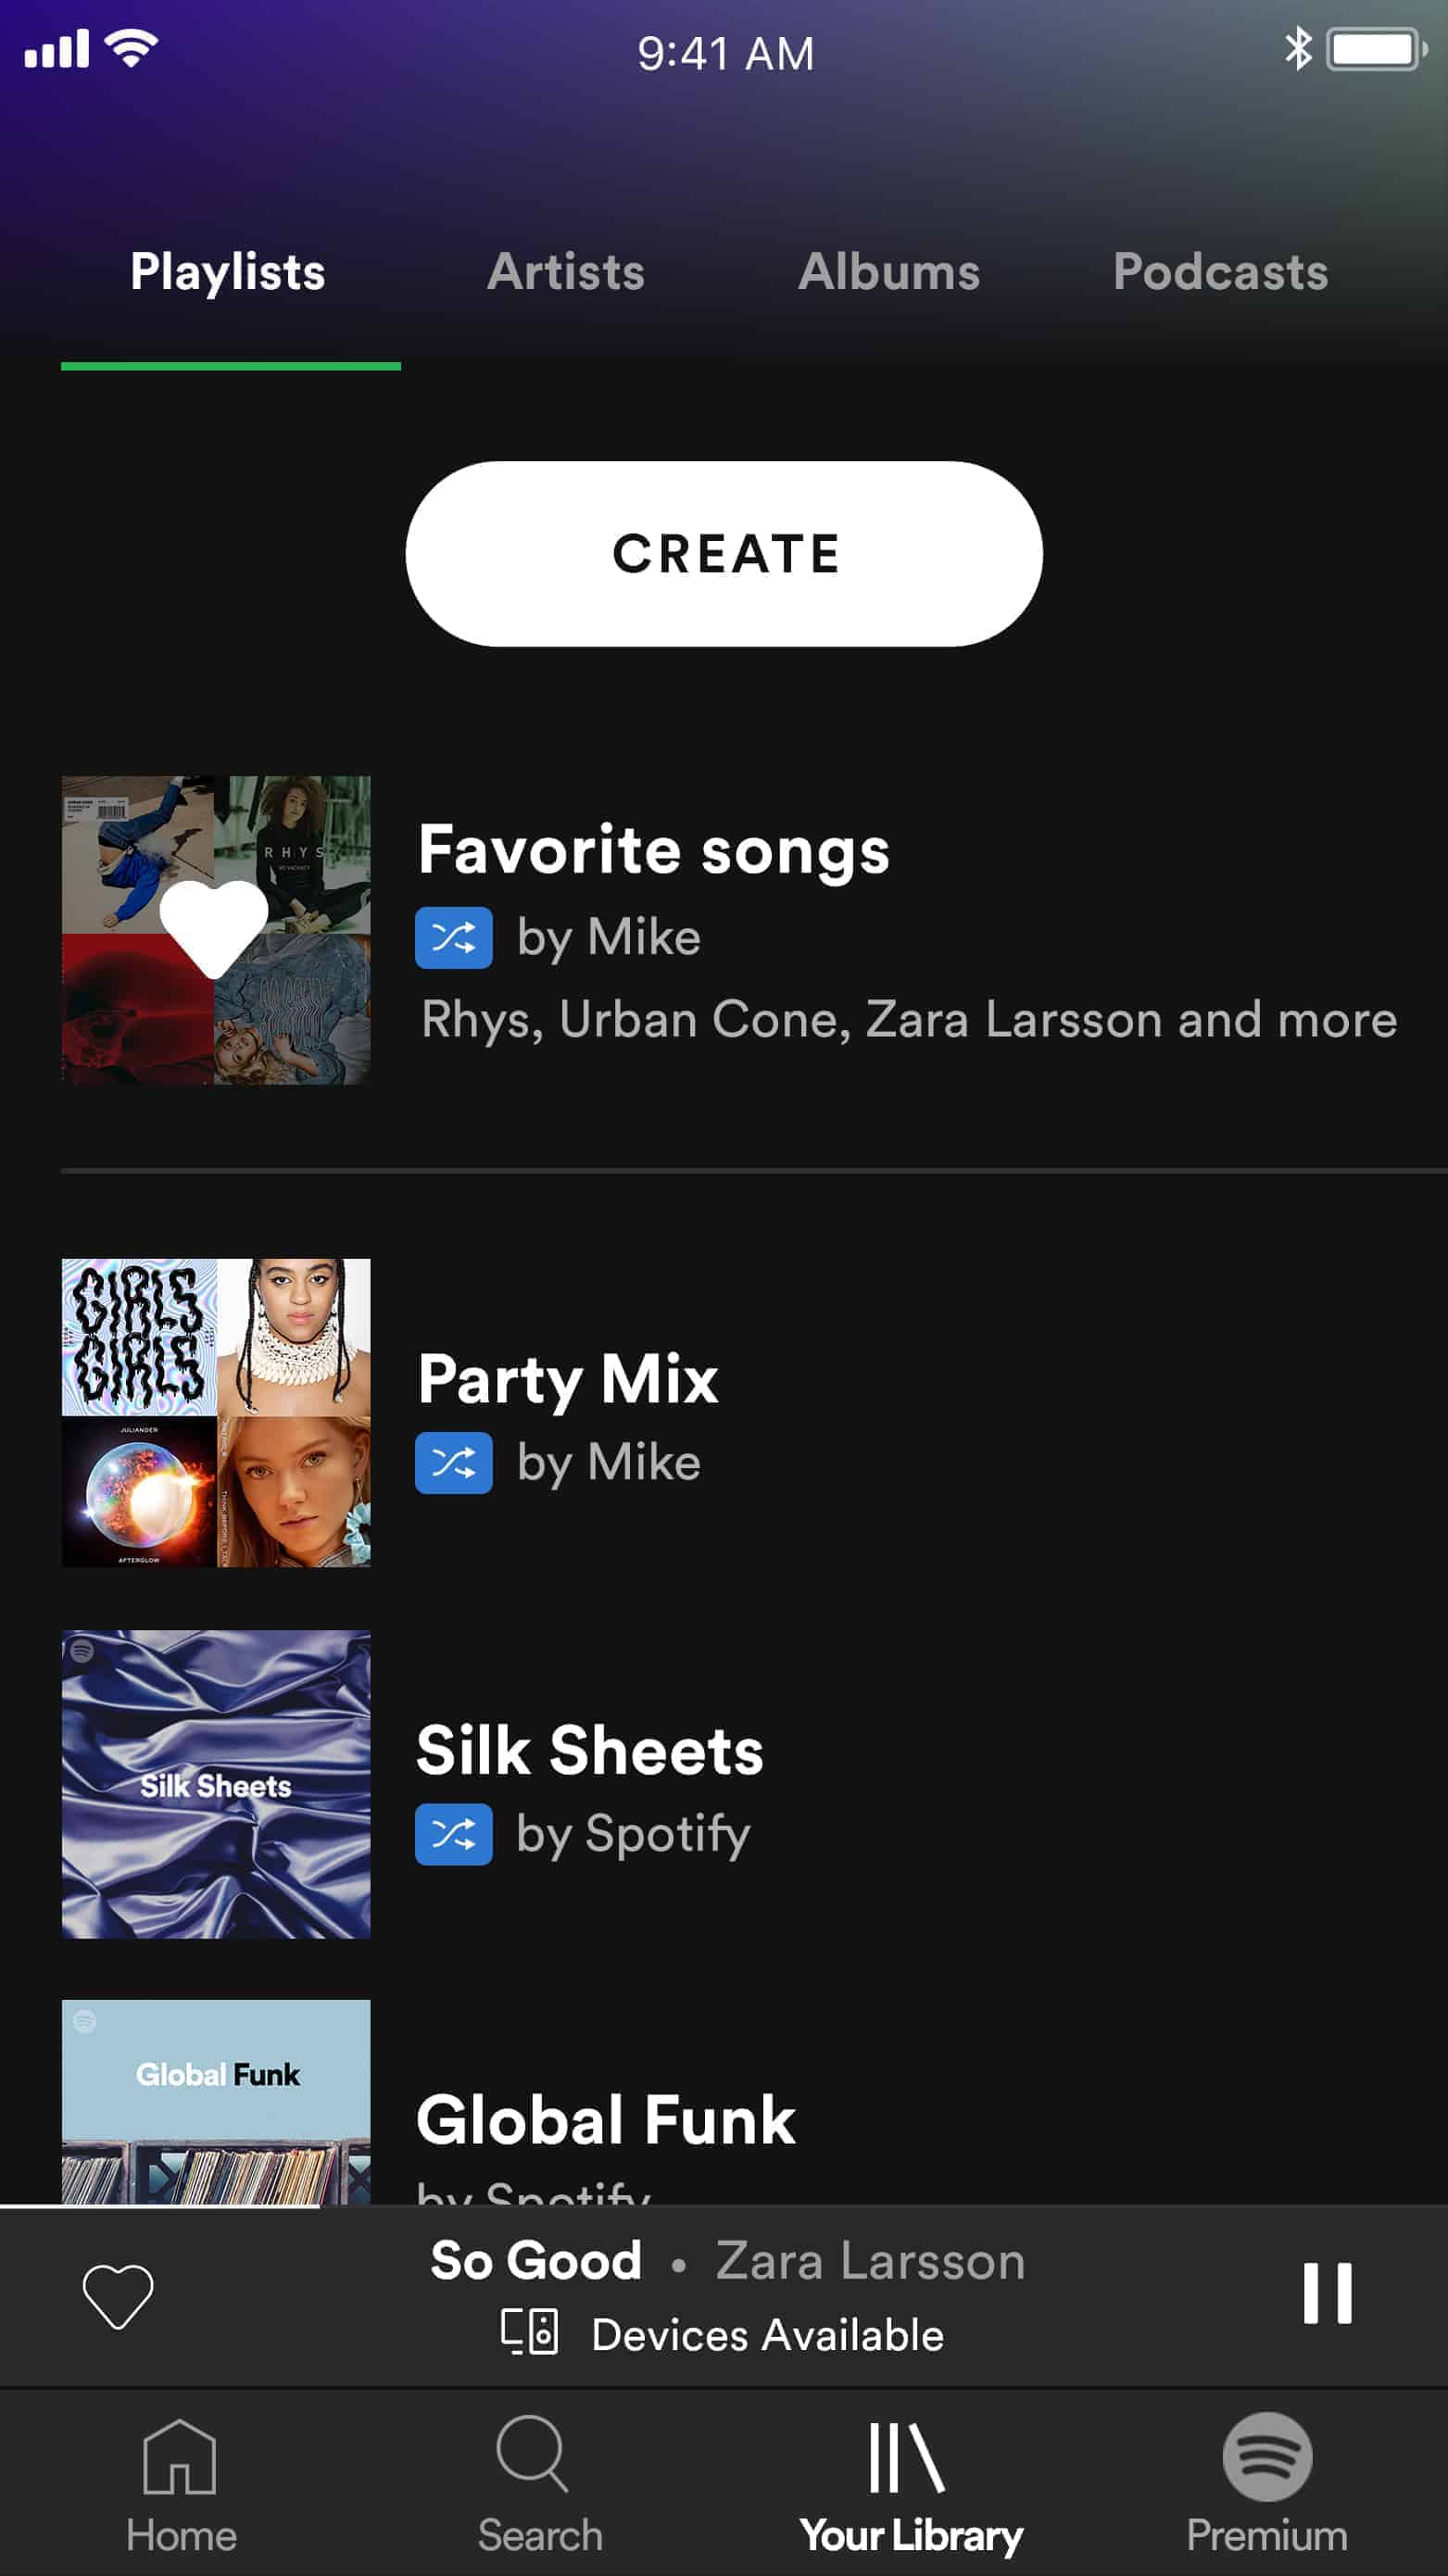 Download Whole Spotify Library